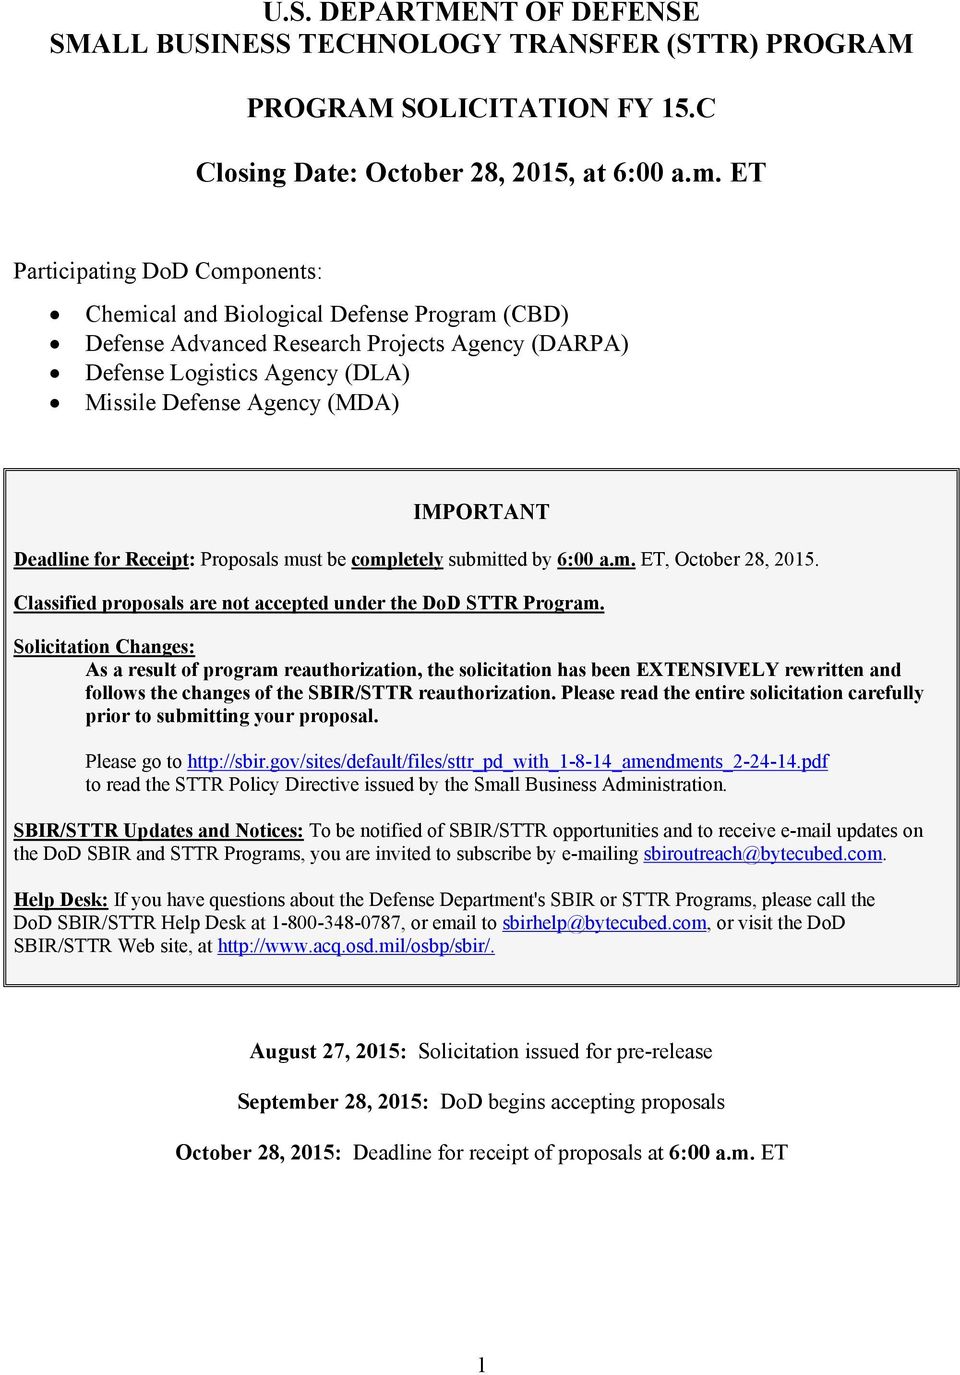 Deadline for Receipt: Proposals must be completely submitted by 6:00 a.m. ET, October 28, 2015. Classified proposals are not accepted under the DoD STTR Program.